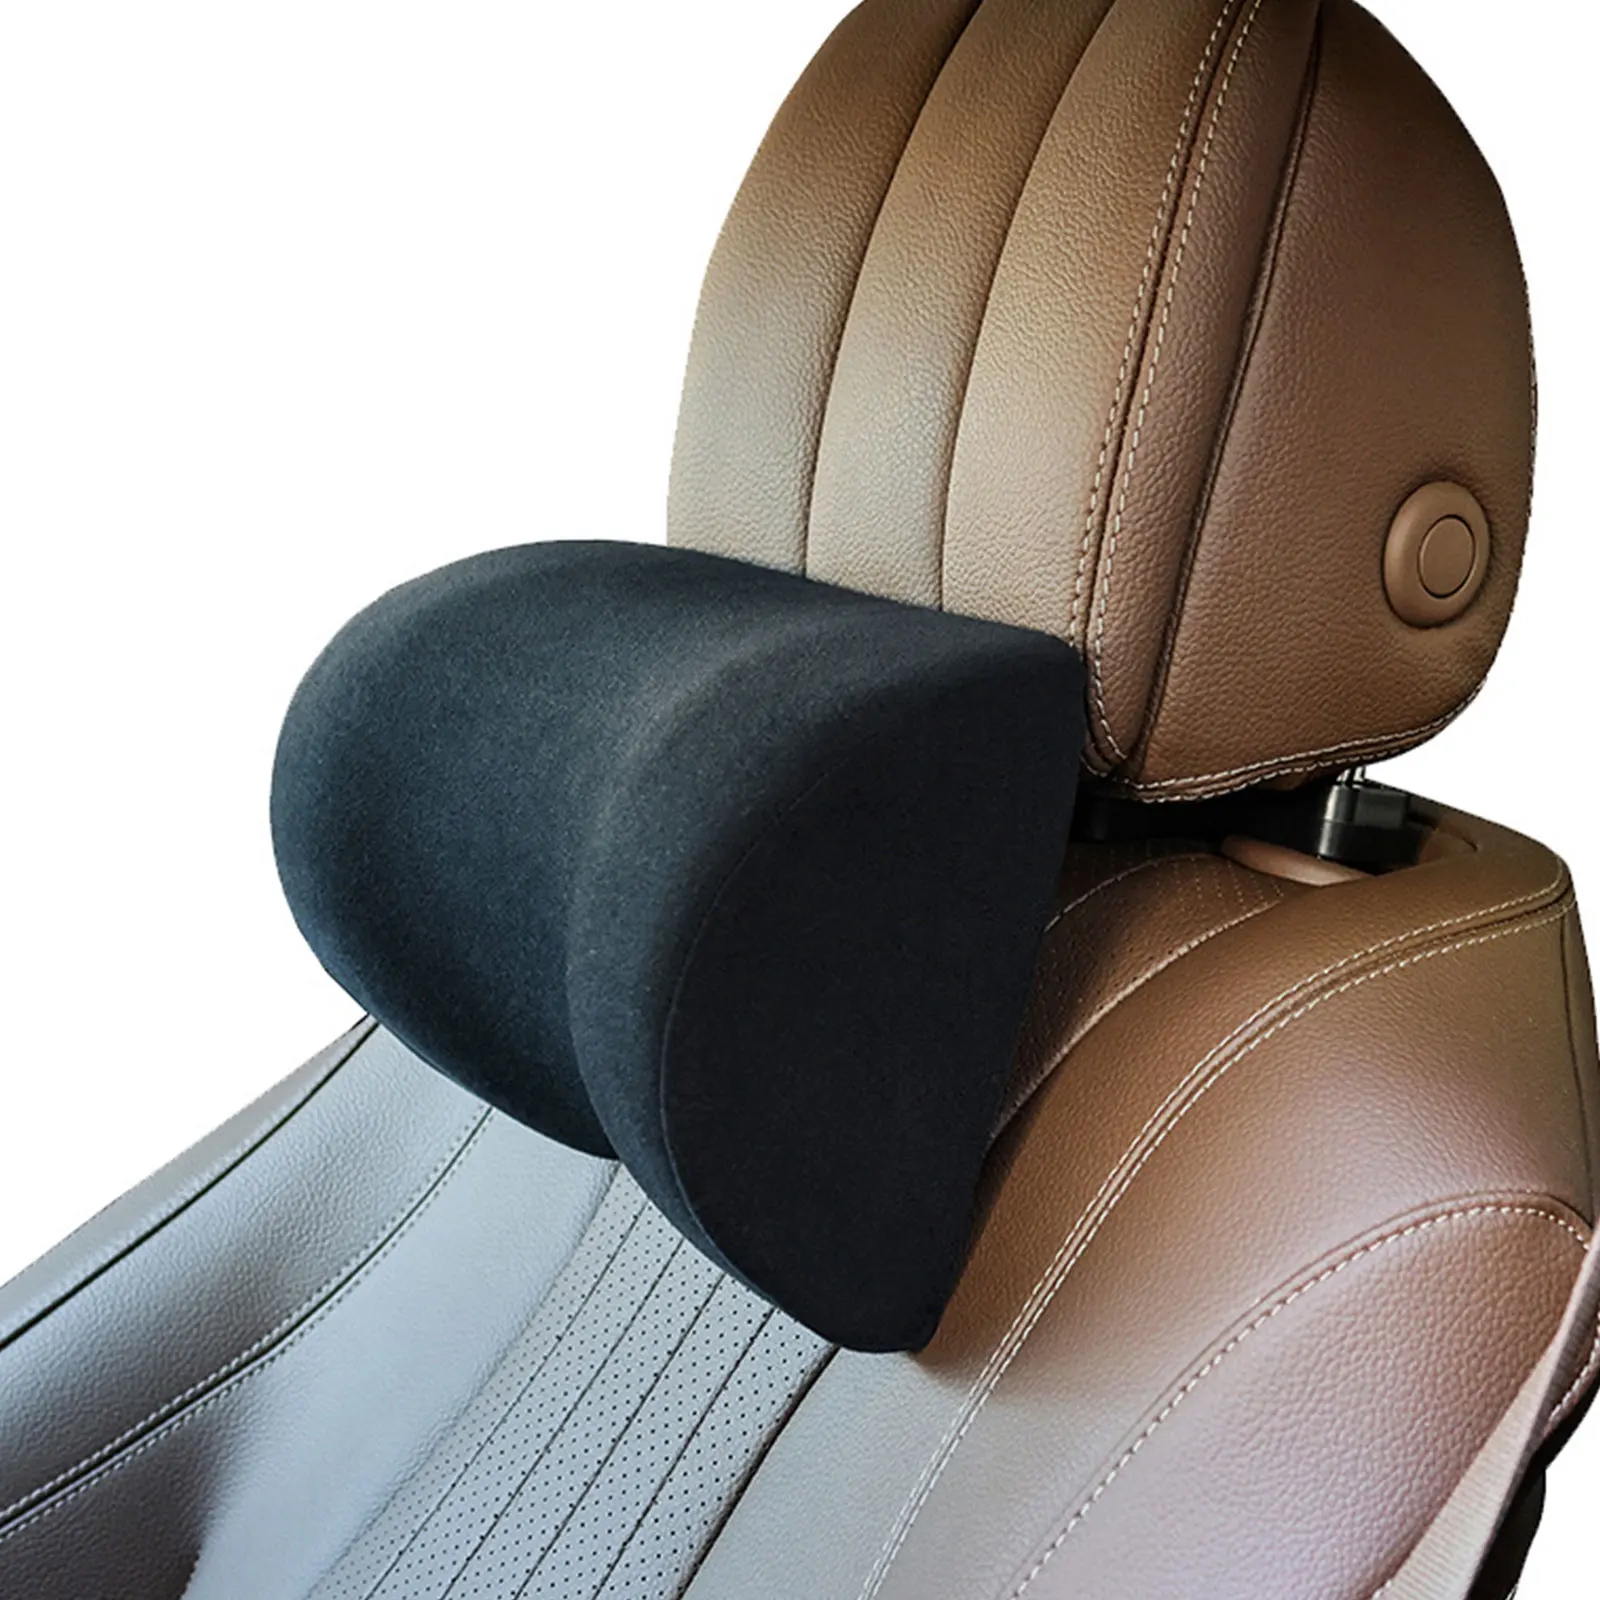 

Leather Car Seat Headrest Pad Memory Foam Pillow Adjustable Head Neck Rest Support Cushion with Hook Travel for Kids Adult